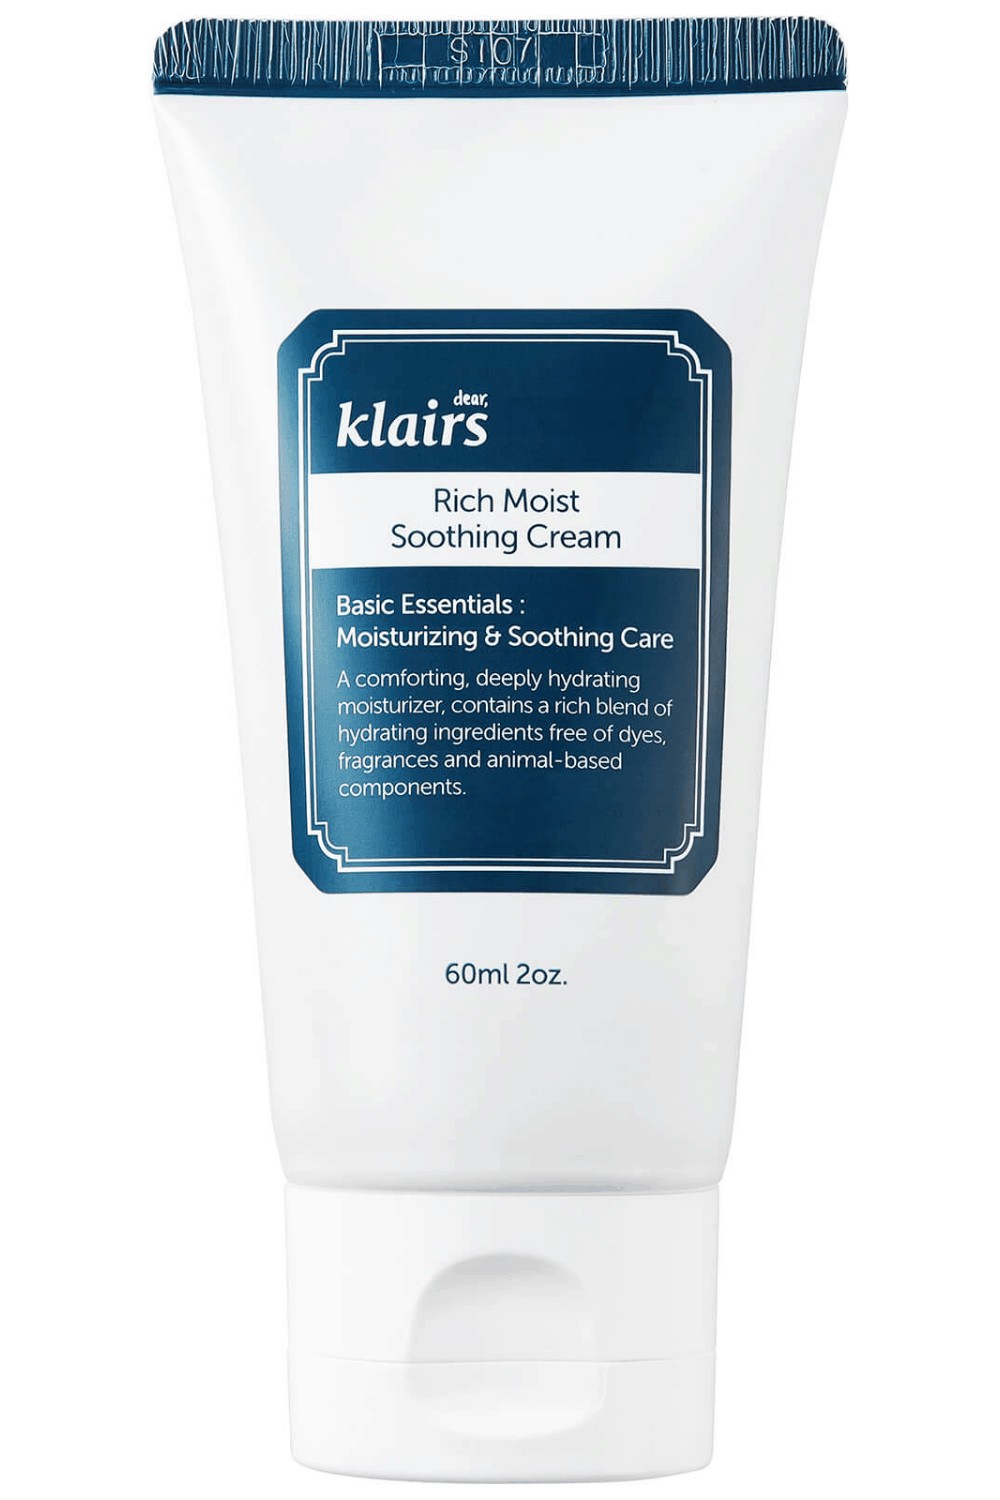 KLAIRS – Rich Moist Soothing Cream